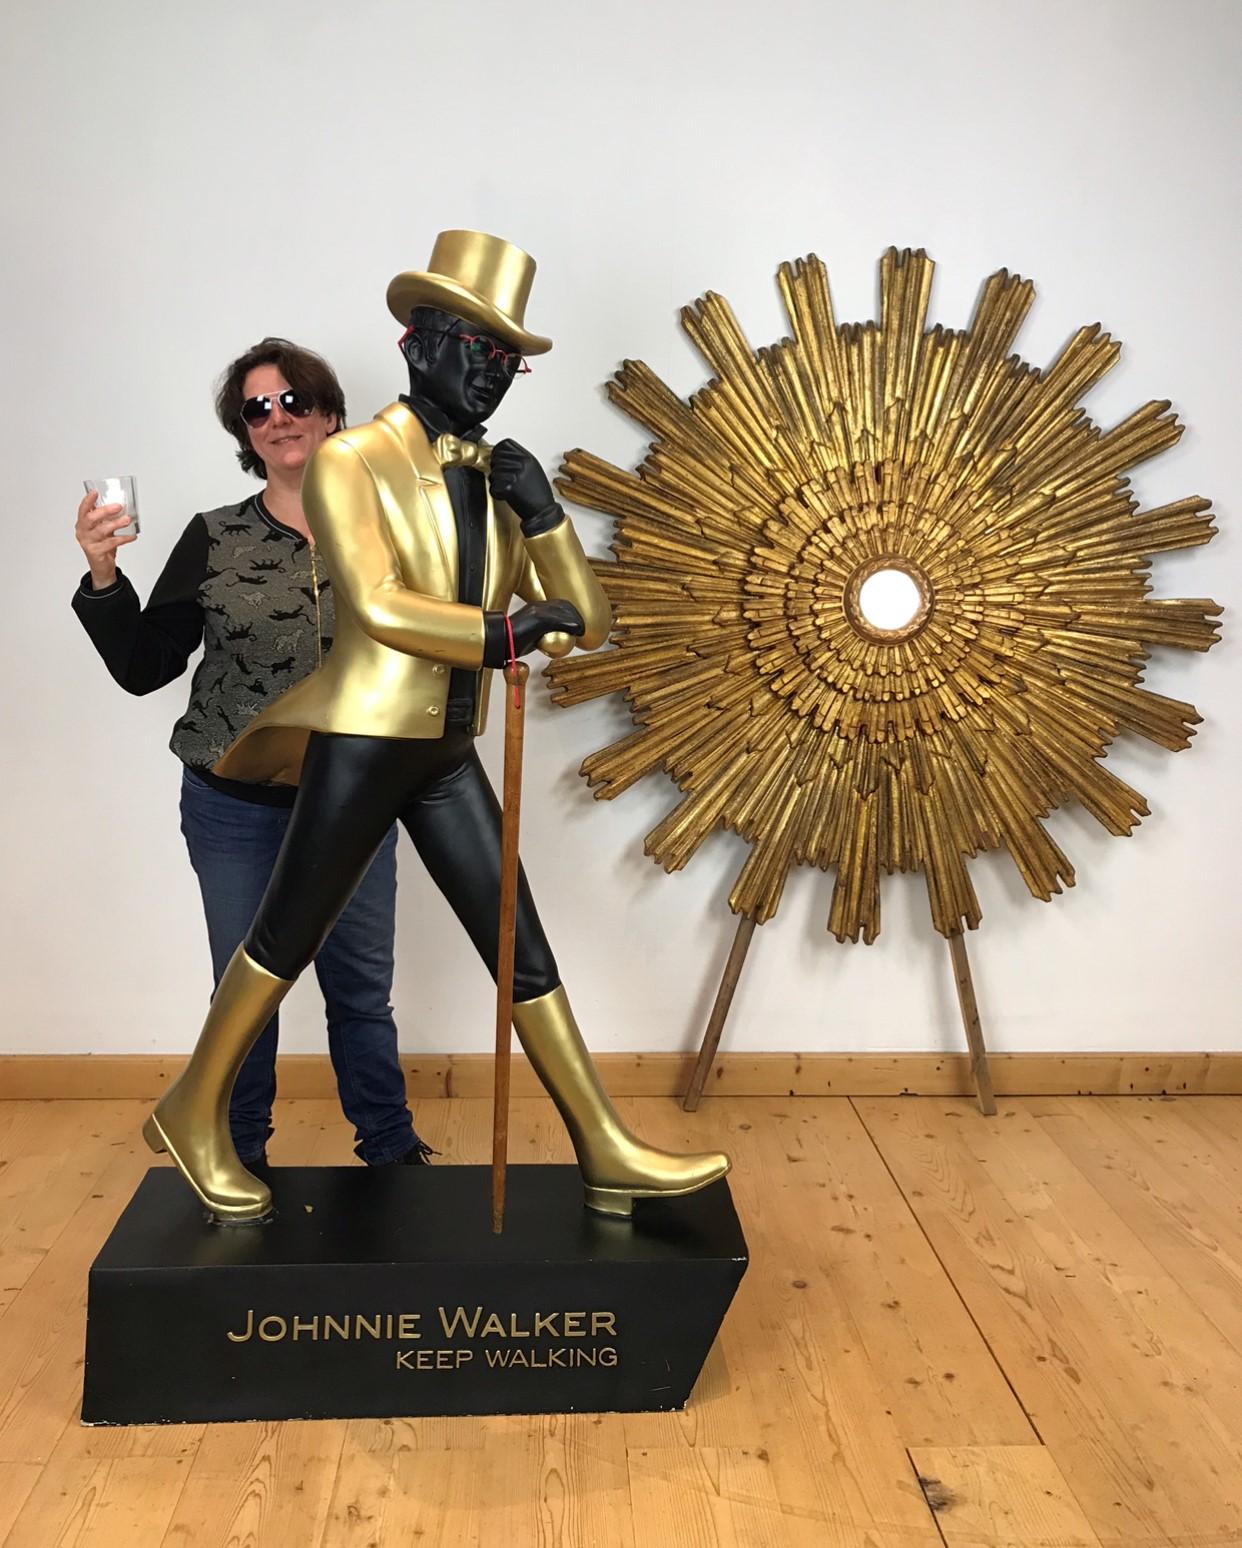 Lifesize Johnnie Walker display man.
A lifesize advertising display - shop display - store display figure for Scotch whisky. 
The typical striding man with top hat, coat, boots and walking stick.
A black and gold advertising figure for the